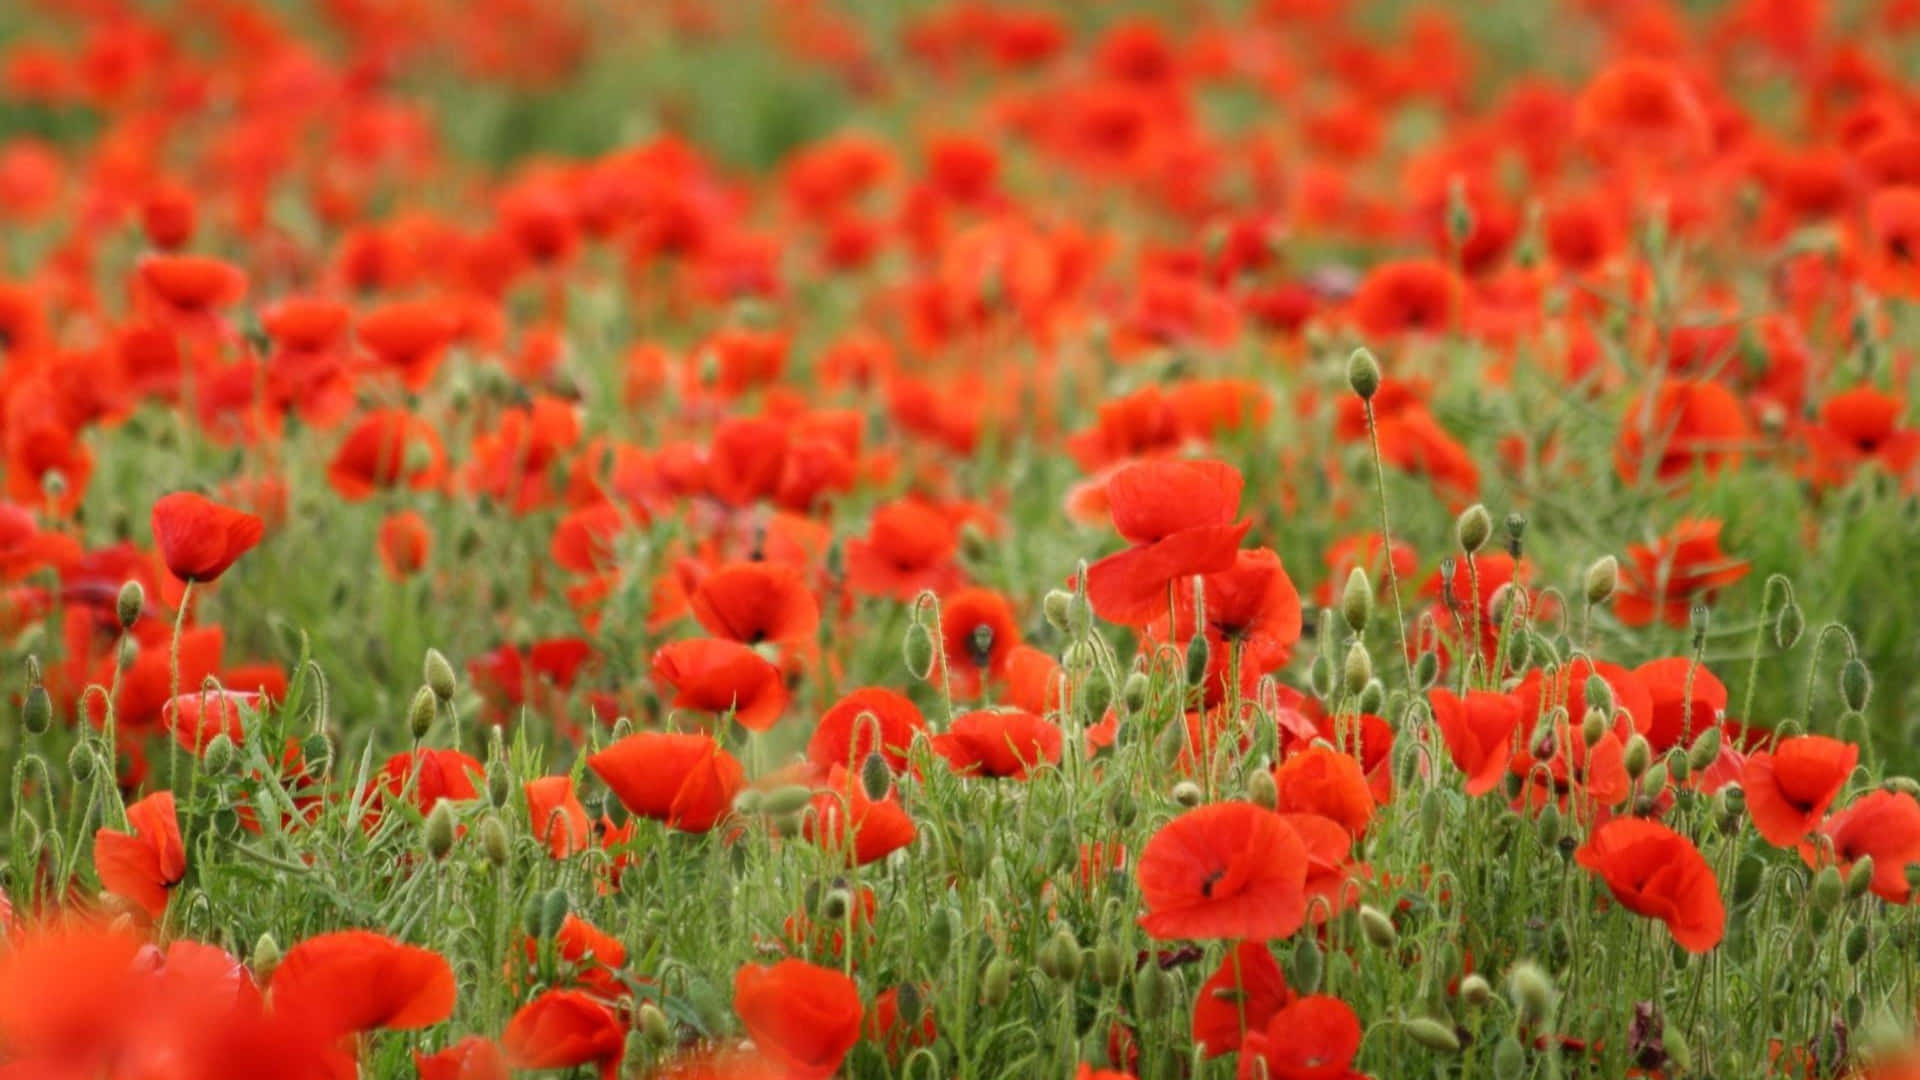 Poppy blooms in the spring, adding a splash of color to the landscape